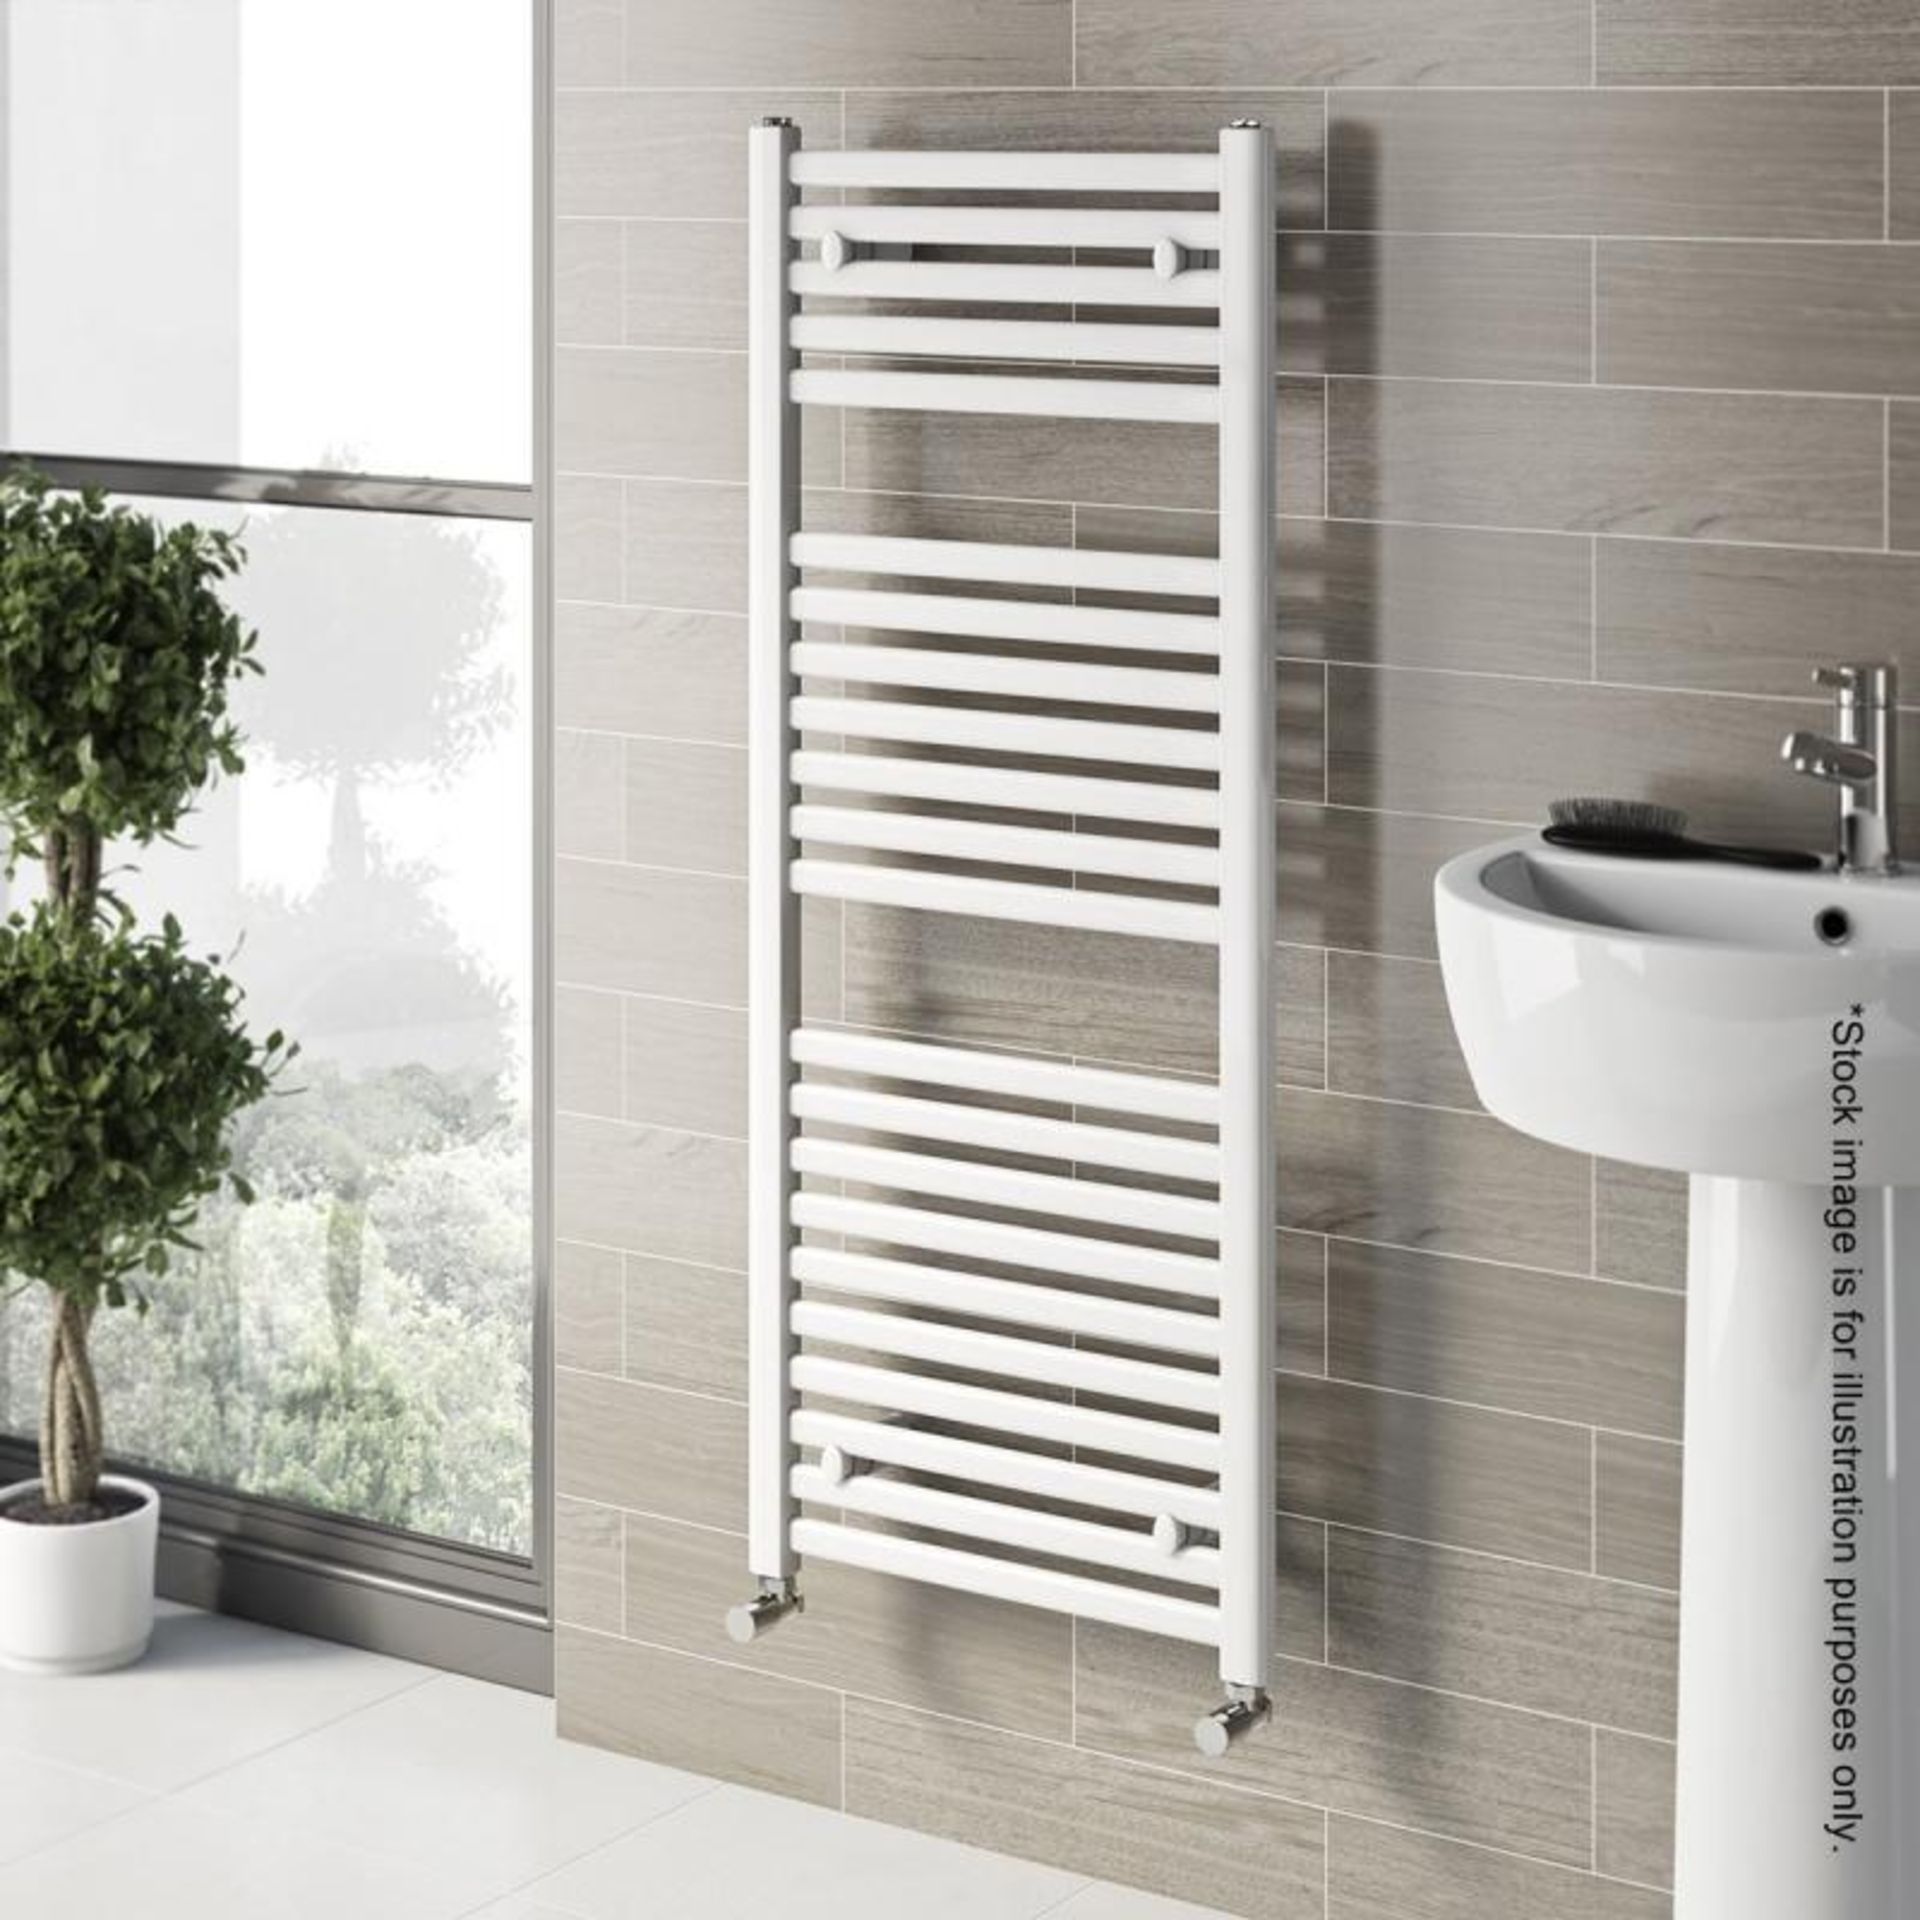 1 x OVAL Heated Towel Rail Radiator In White (TW27) - Unused Boxed Stock - Size: 1200 x 500mm - CL19